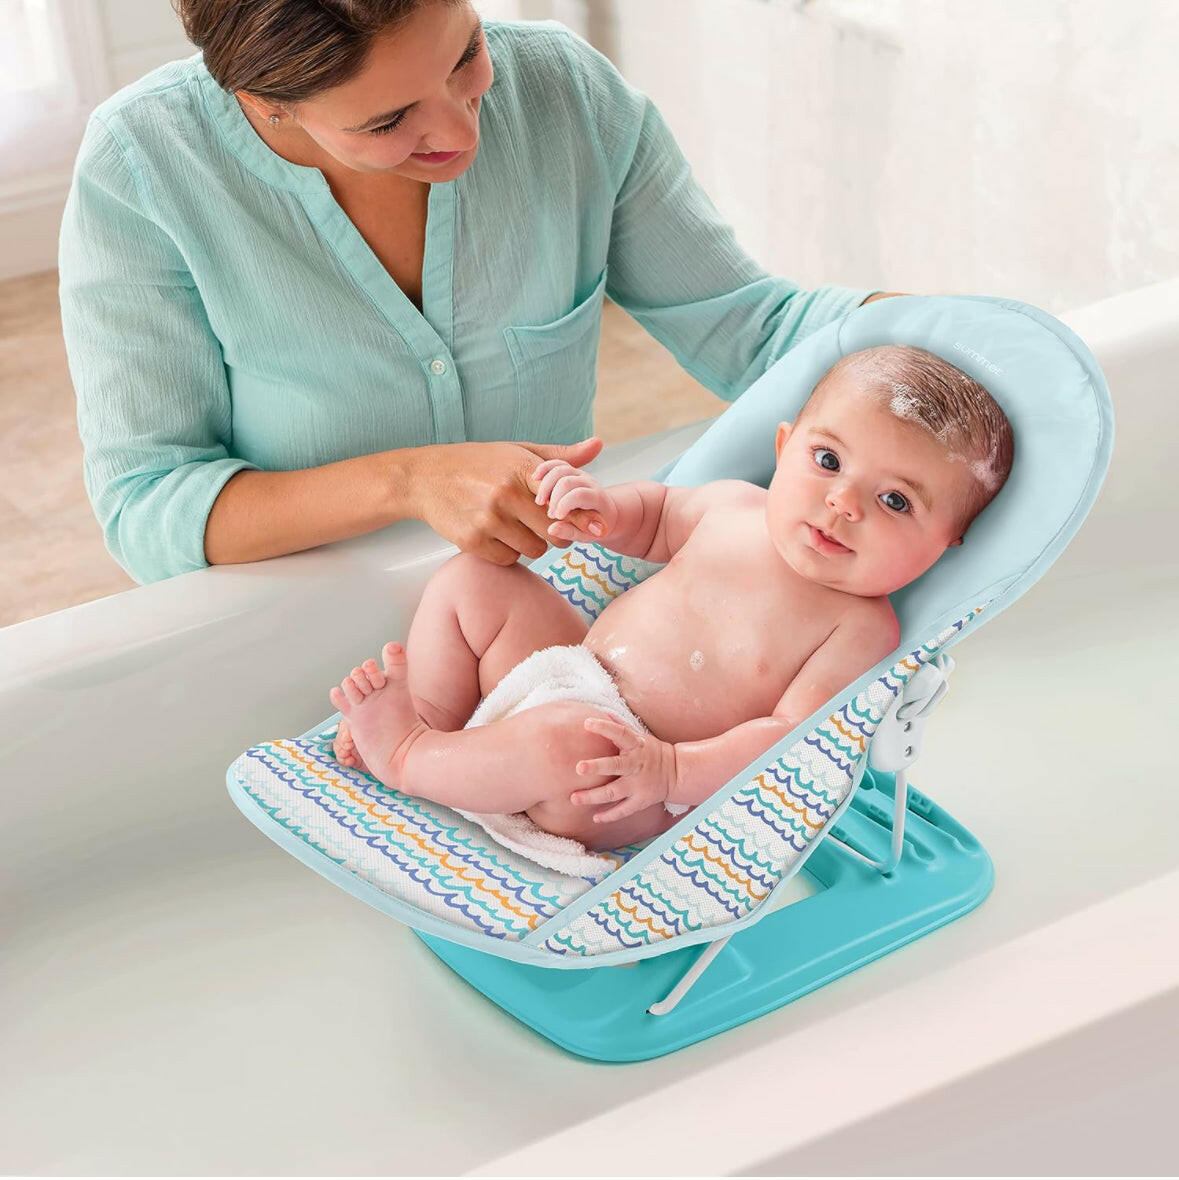 Summer Infant Deluxe Baby Bather-Ride The Waves